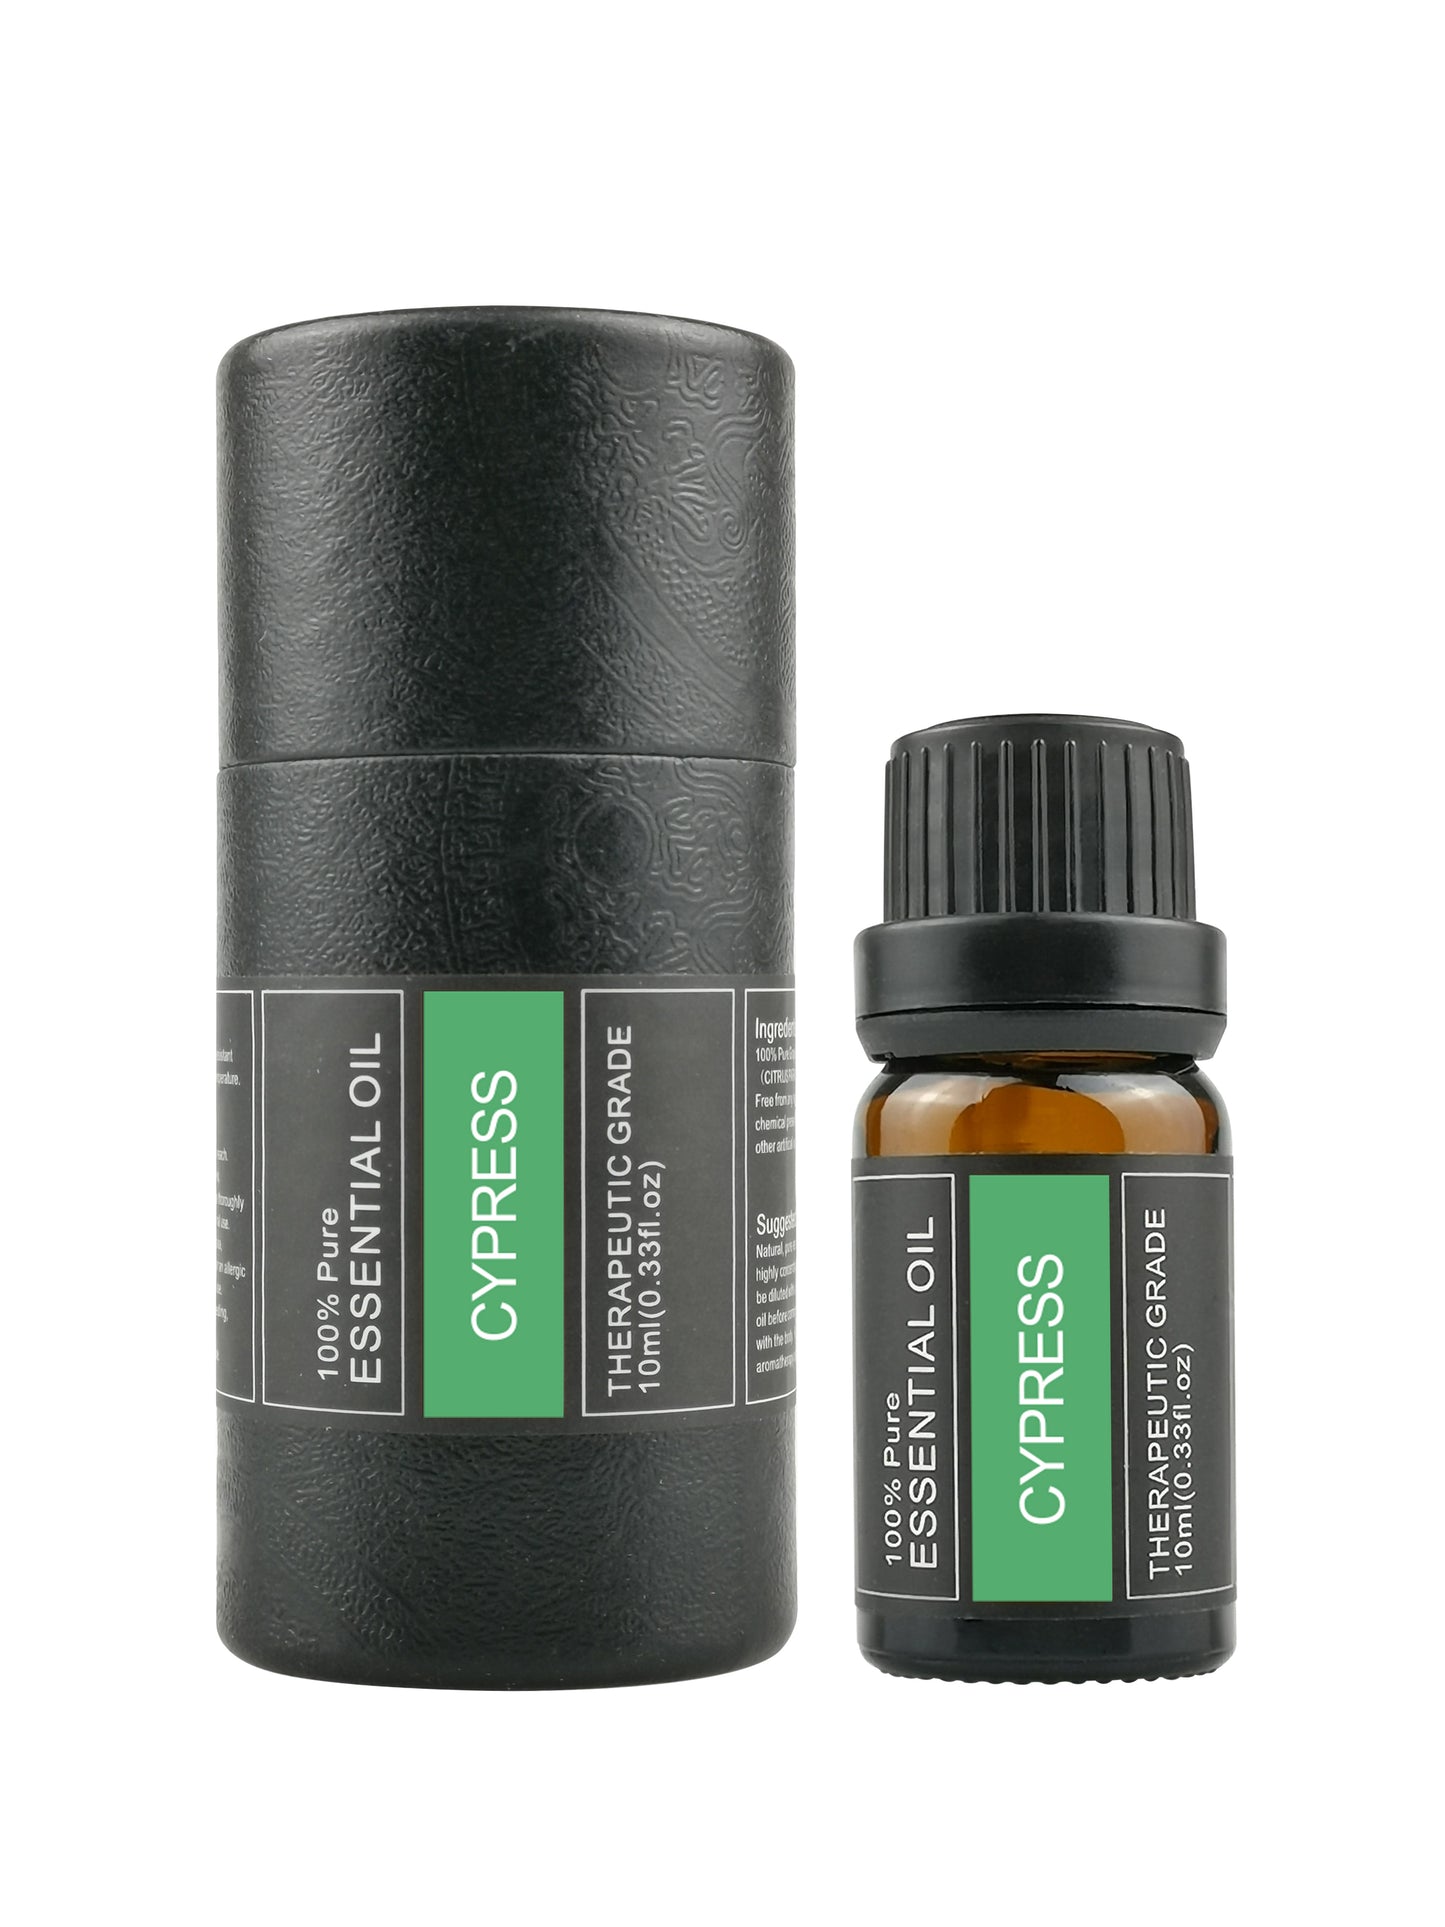 OEM & ODM Customized Organic Cypress Aromatherapy Essential Oil, Natural Plant Single Essential Oil 246